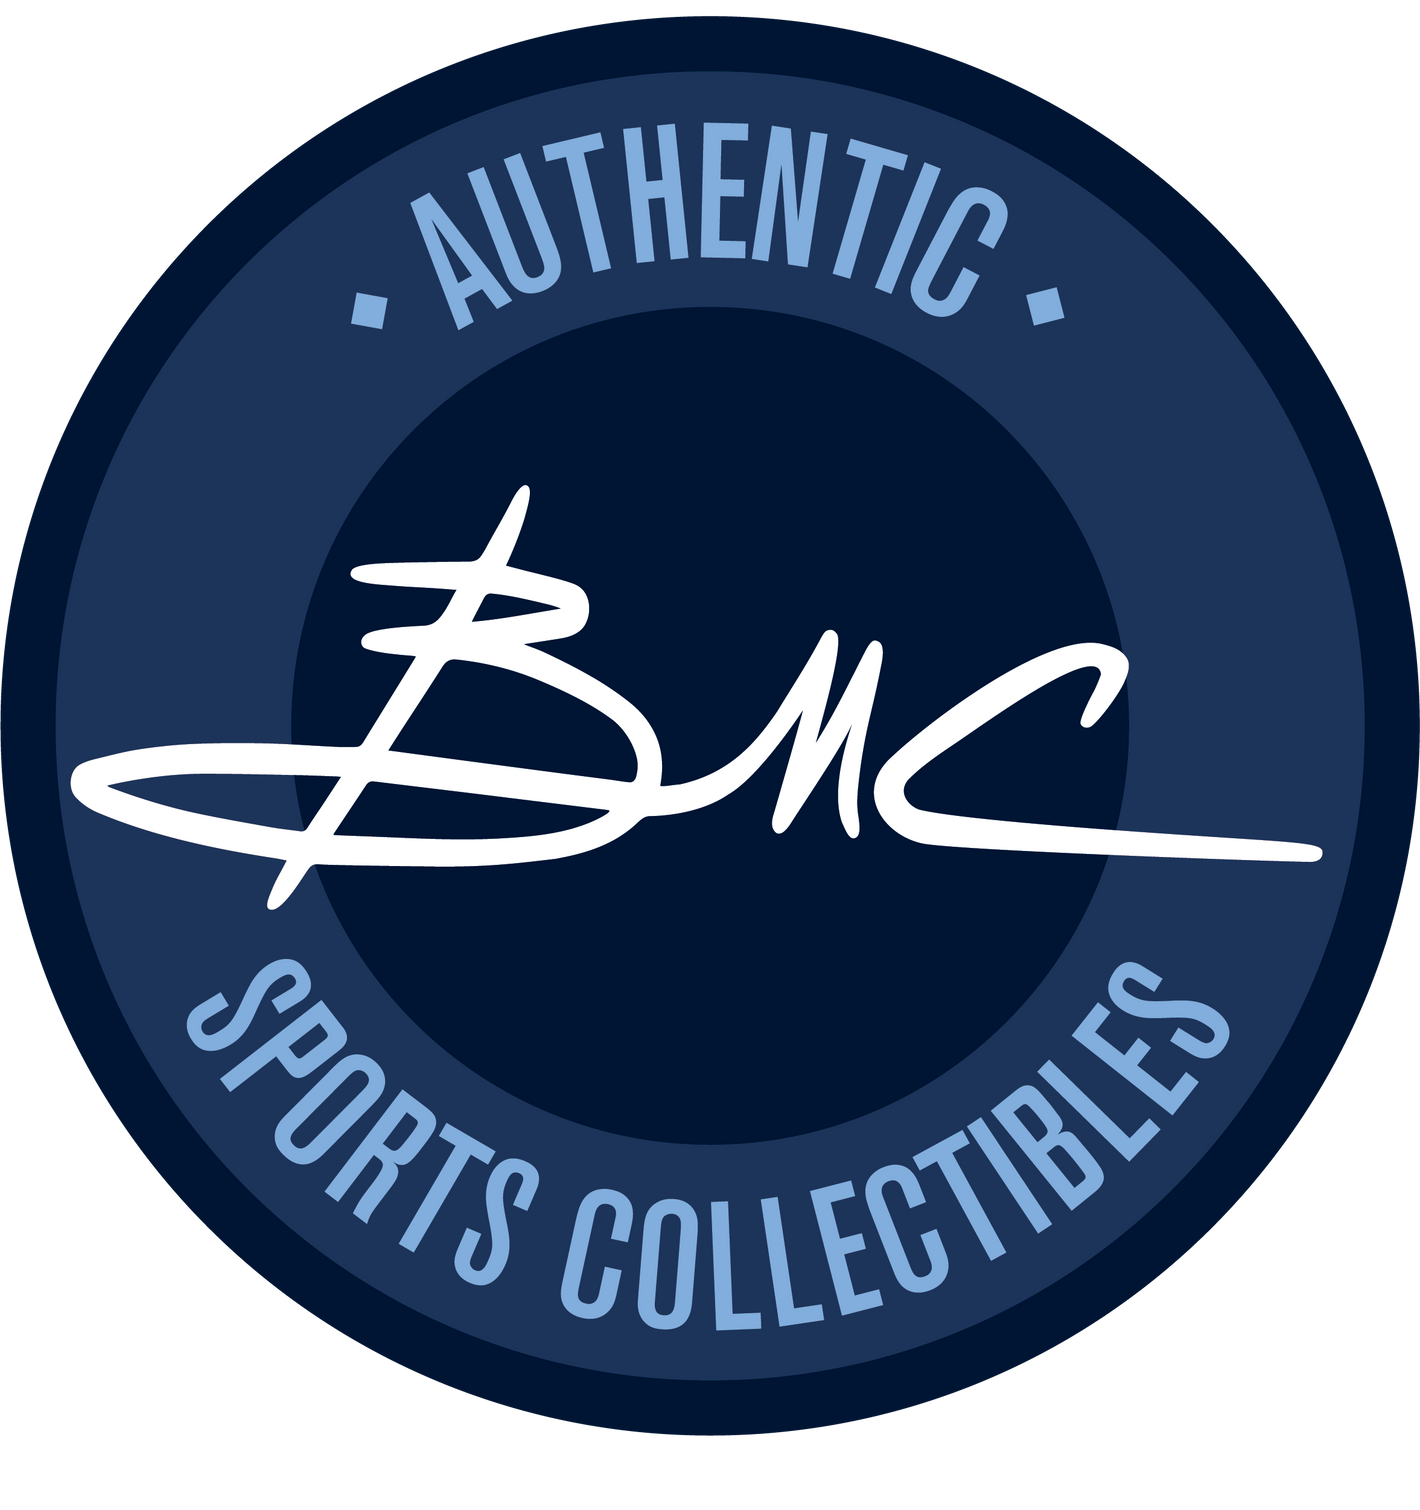 A better man cave starts here. Find that special gift. Don't be lame get in the game with a gift card from BMC Collectibles